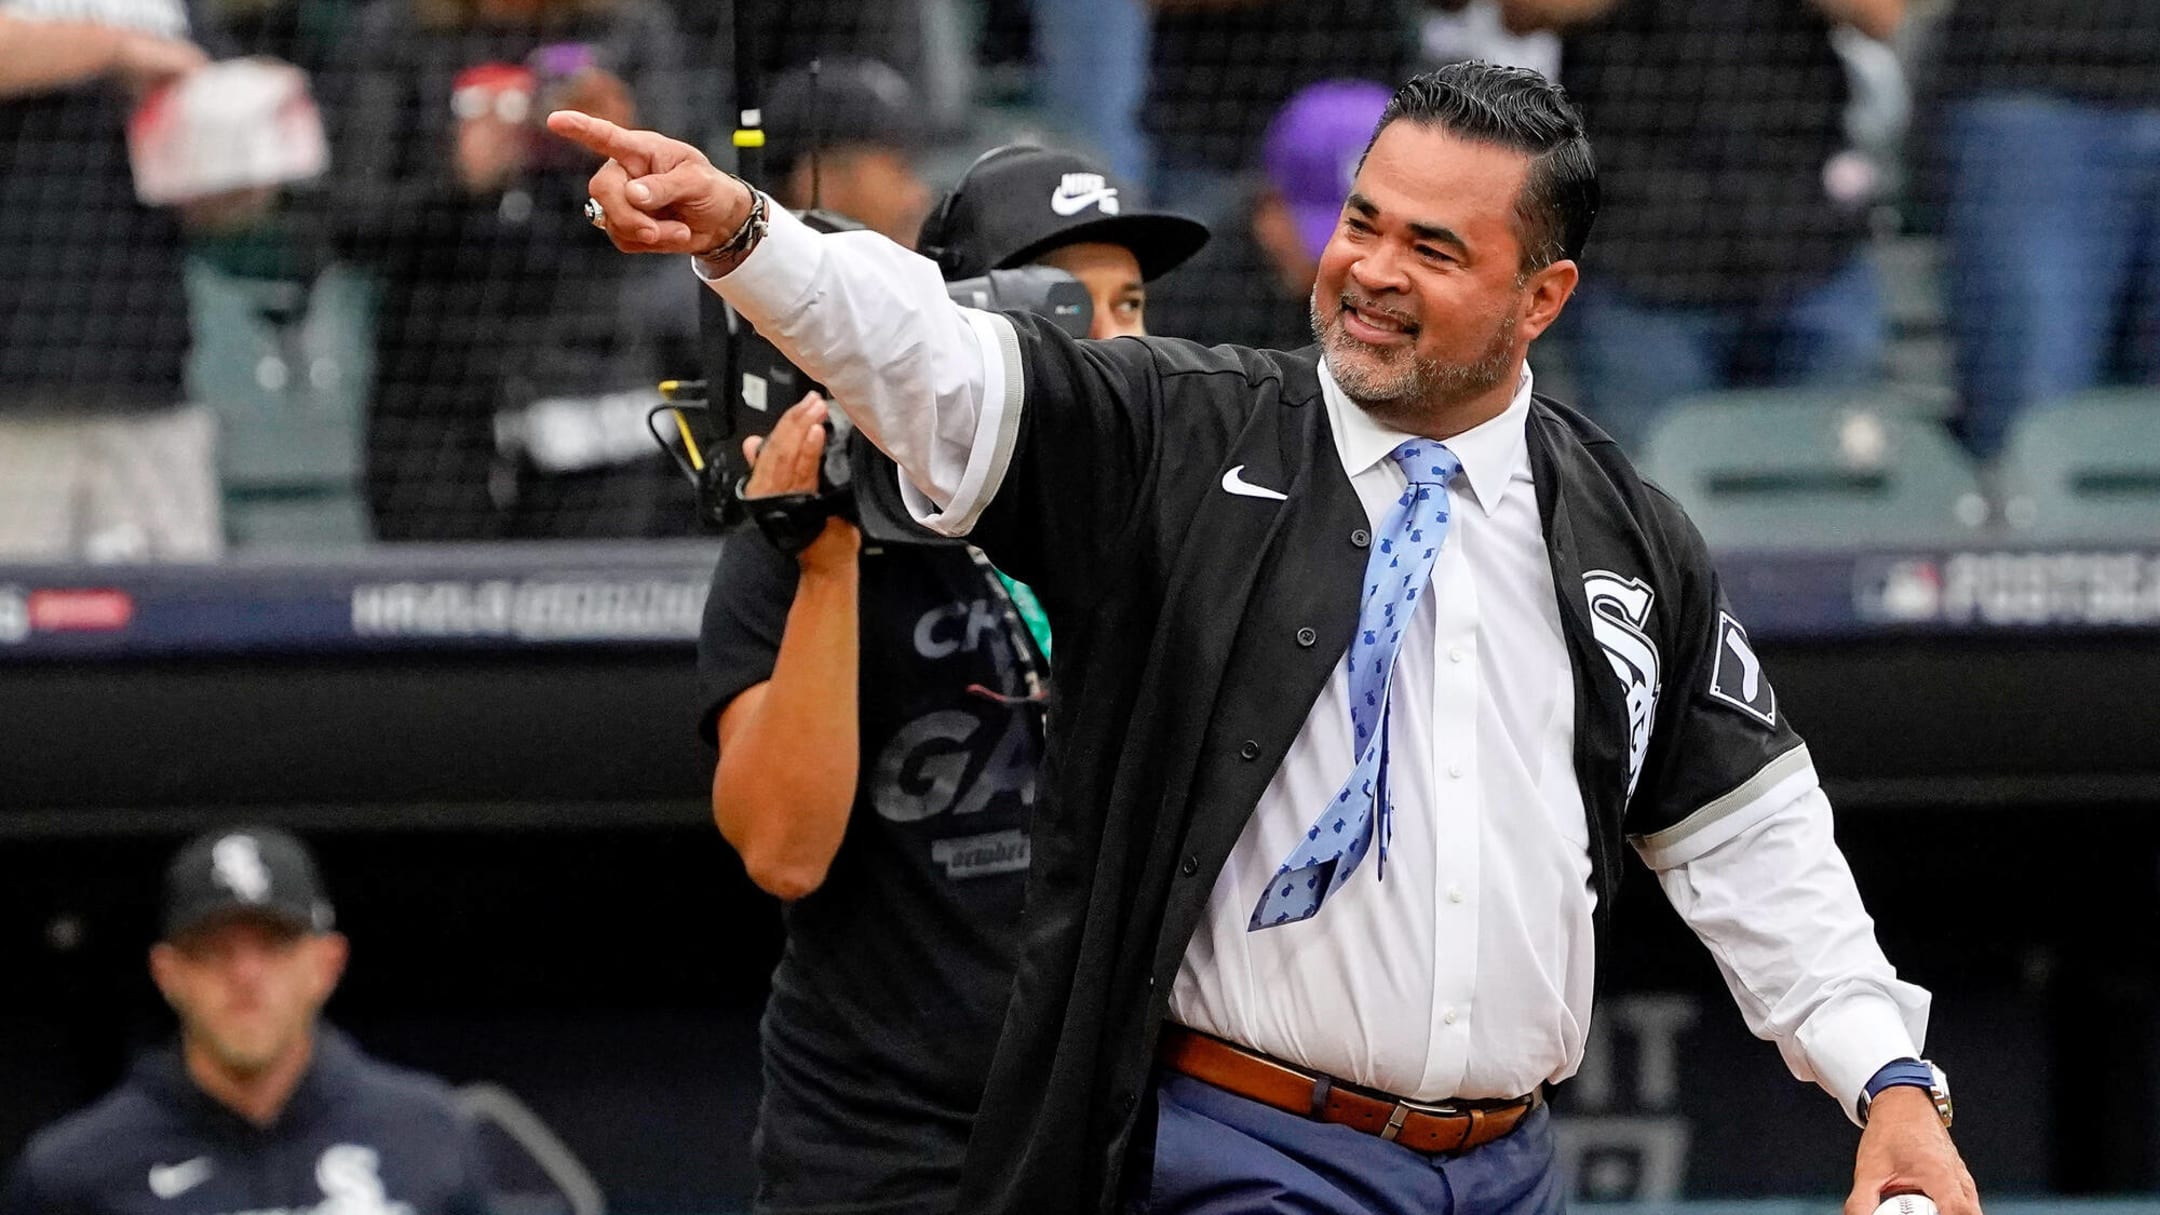 MLB Rumors: Ozzie Guillén to Interview for White Sox Managerial